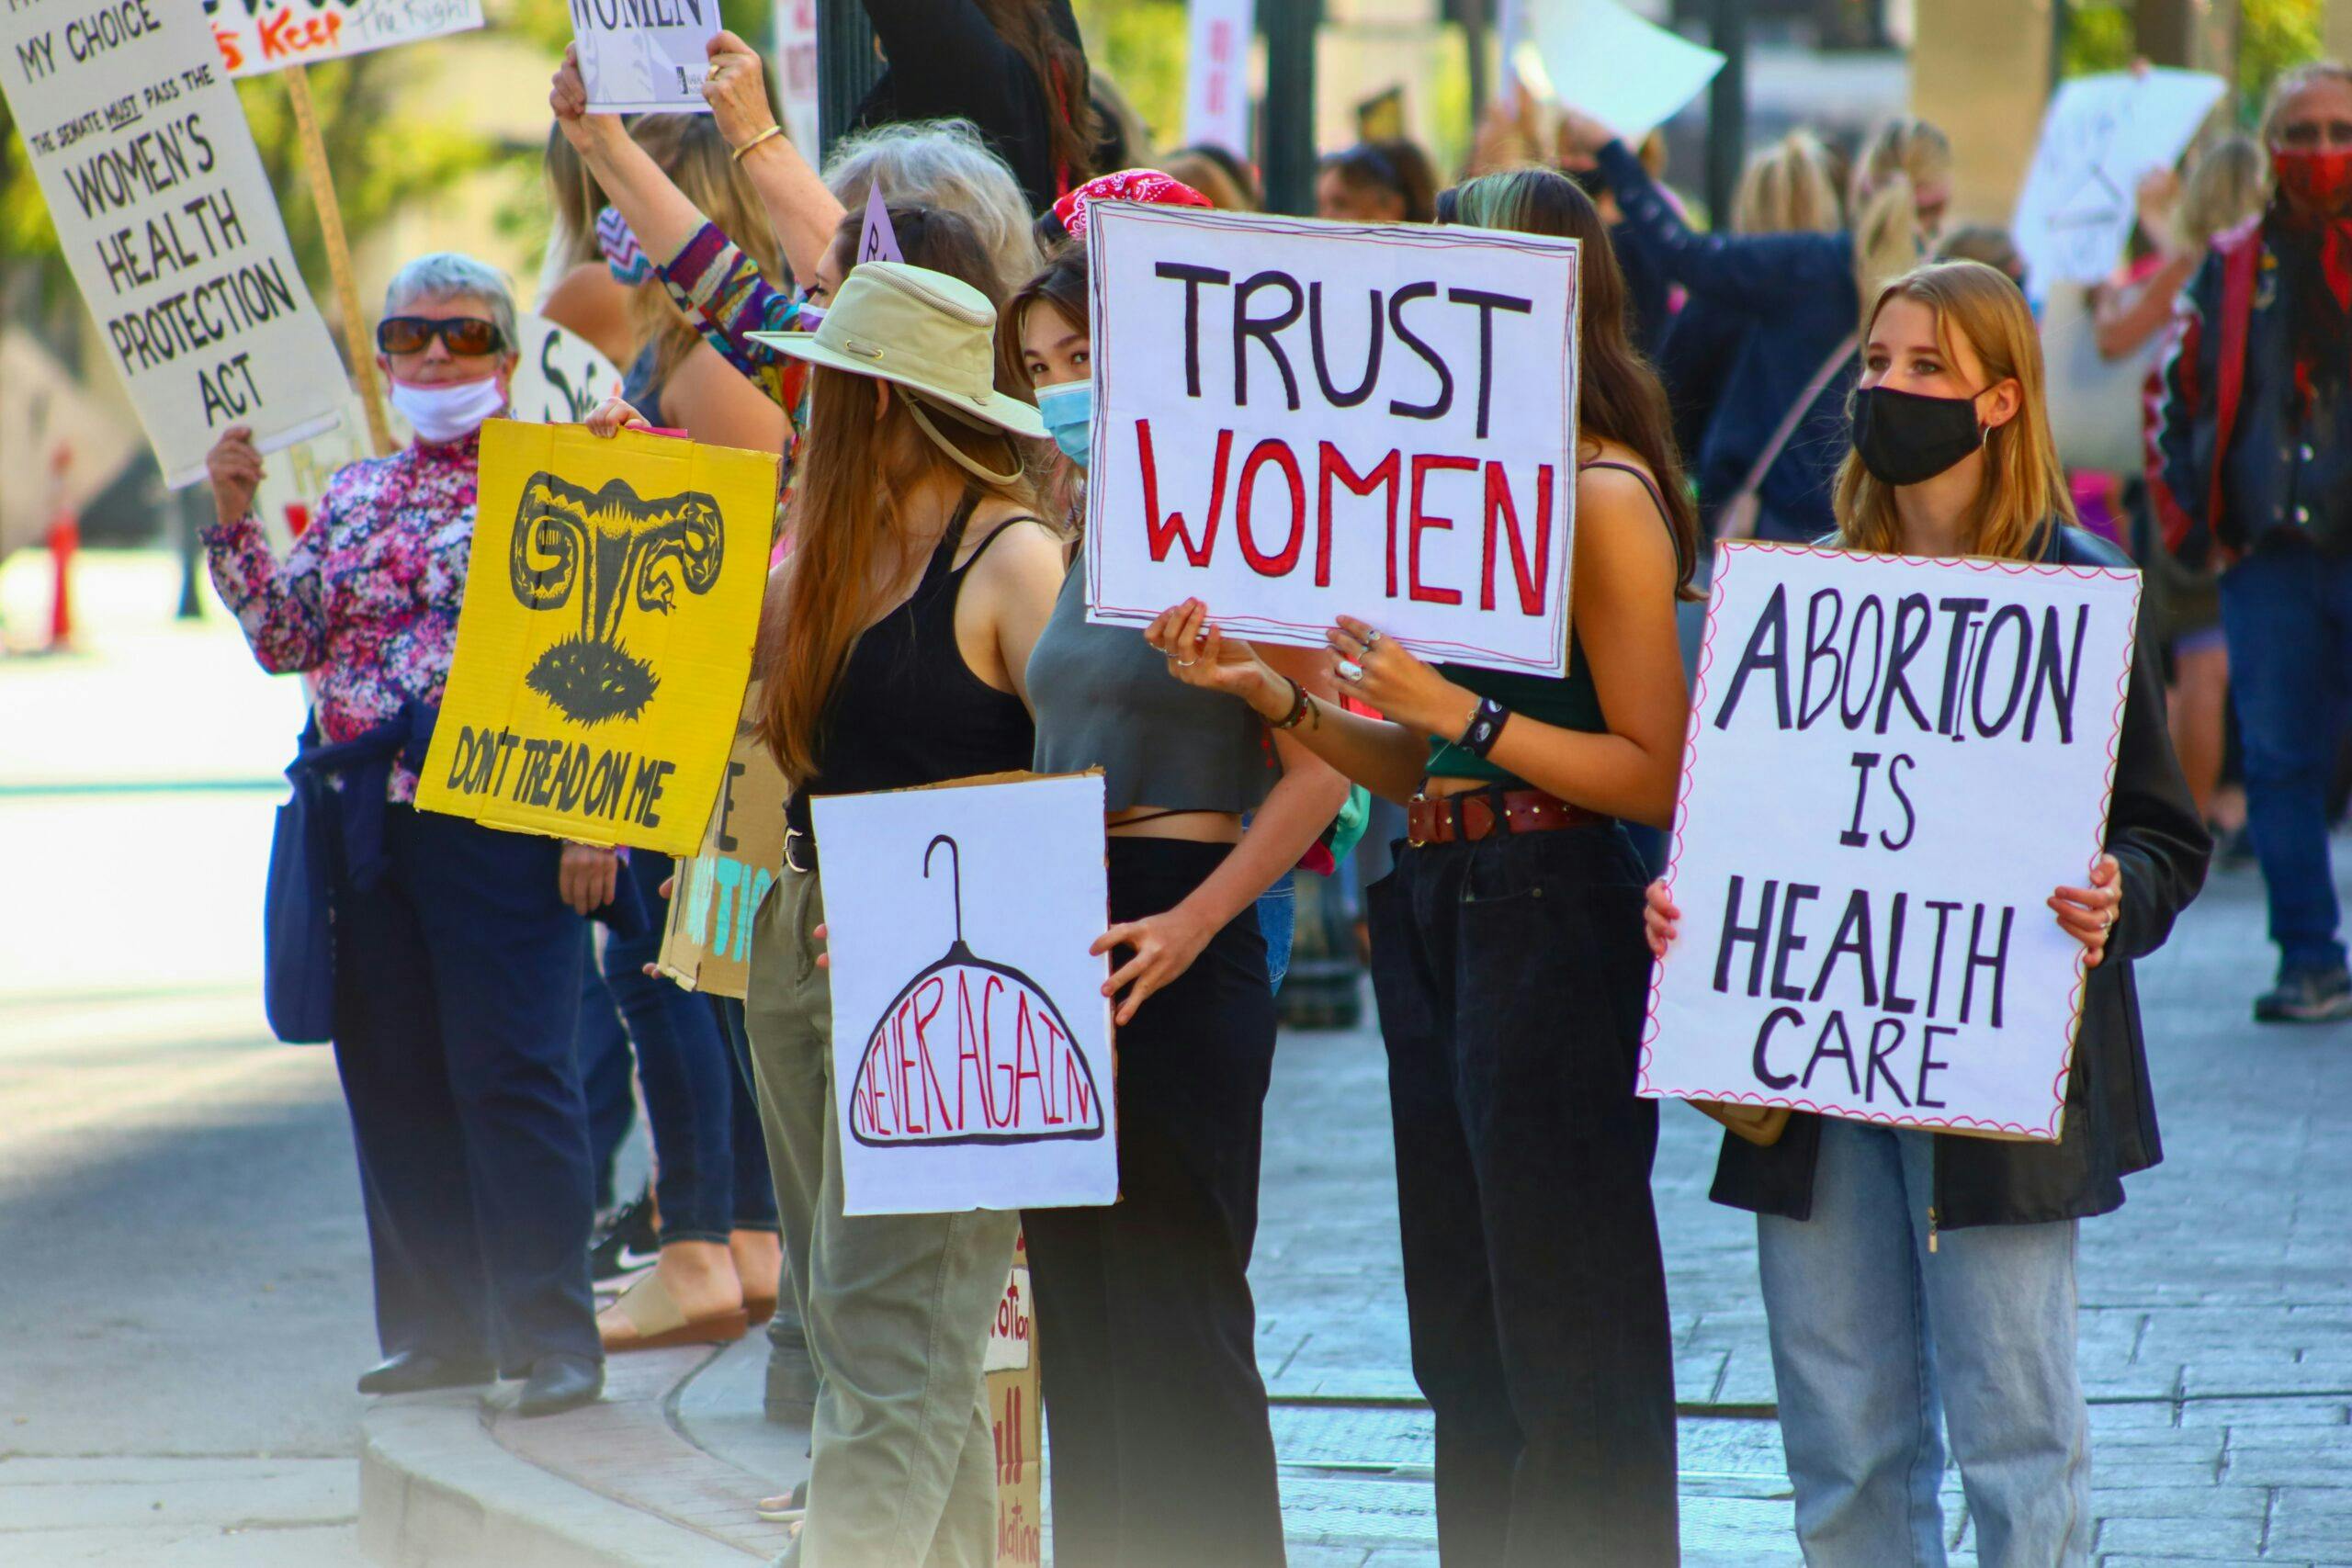 People at a protest, holding up signs with slogans on them like "Trust women", "Abortion is health care" and "Never again".